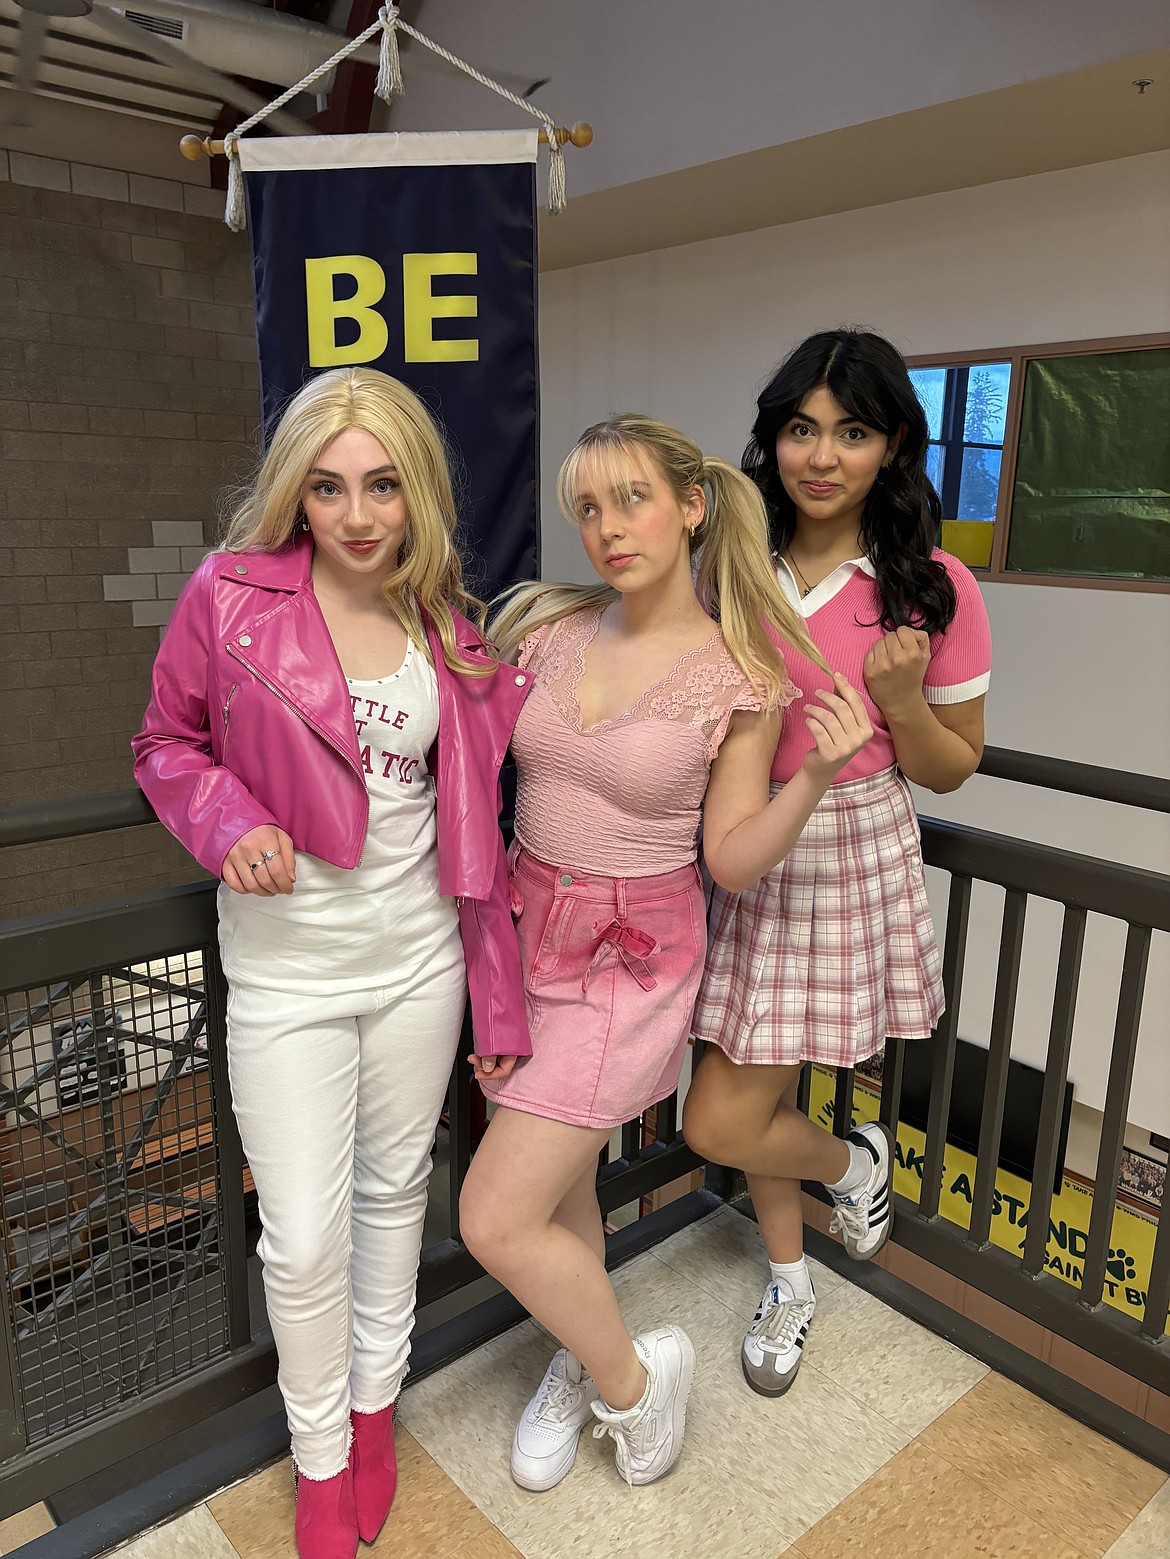 ATP Kids’s production of “Mean Girls the Musical” runs from April 25-28 at the Whitefish Performing Arts Center.